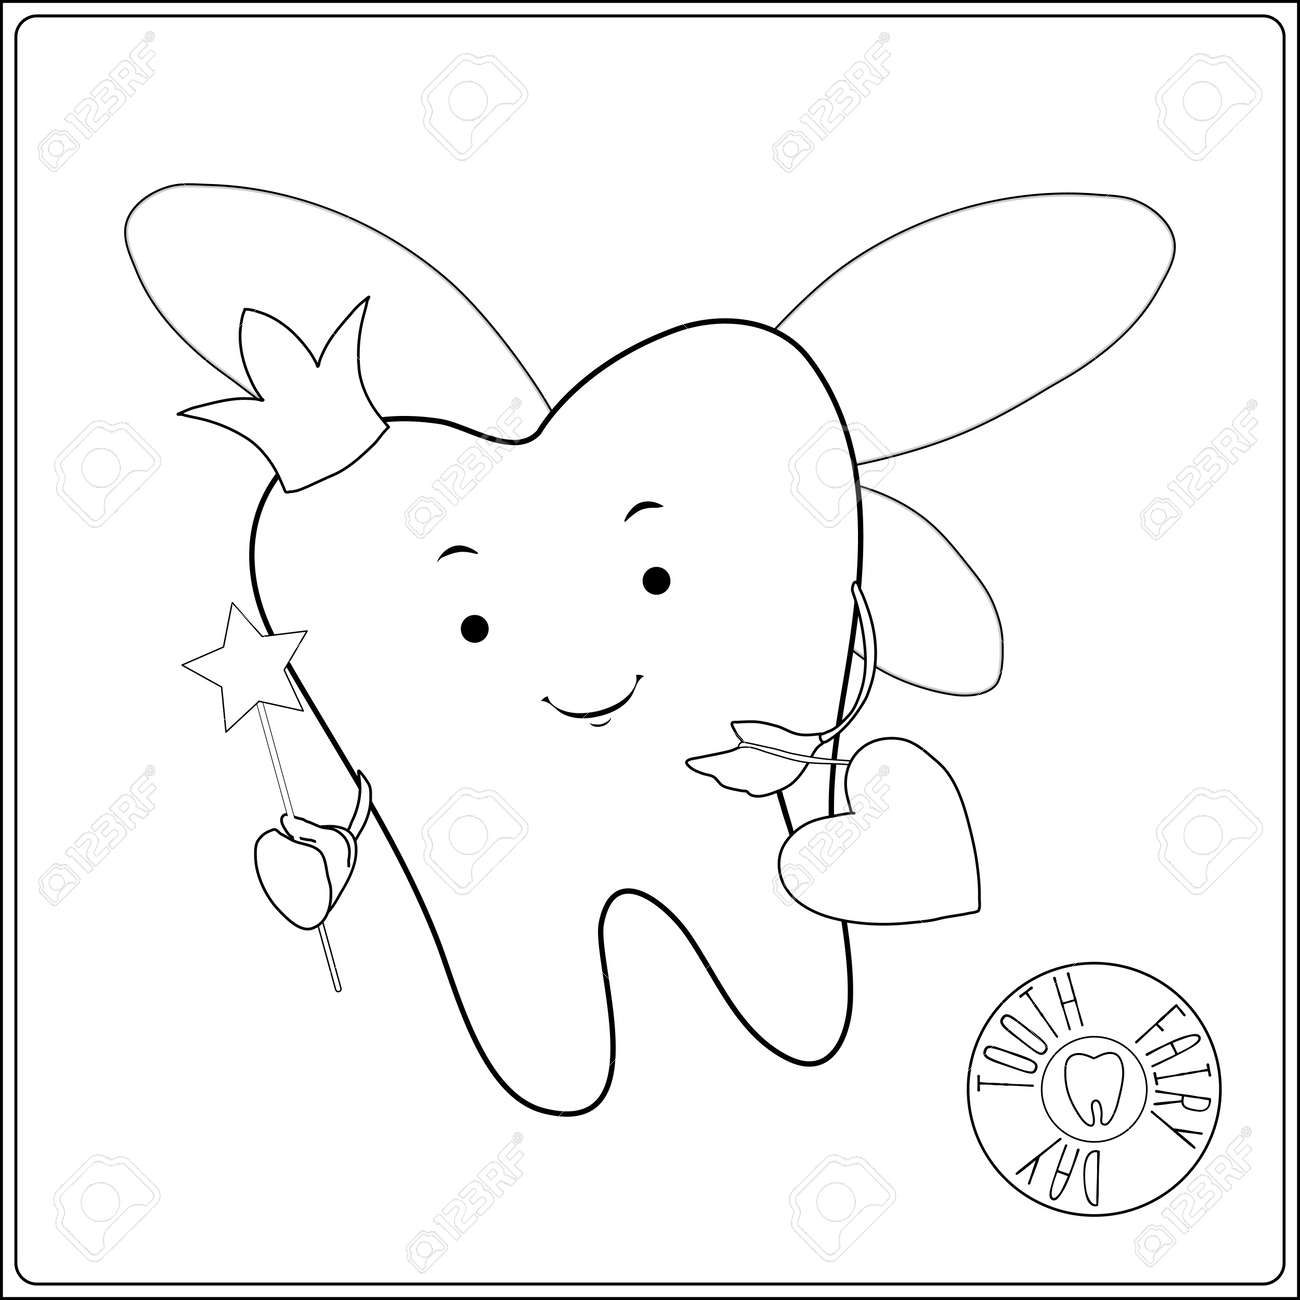 Tooth fairy vector cartoon illustration stylized tooth outline hand drawing vector illustration coloring page for the coloring book royalty free svg cliparts vectors and stock illustration image